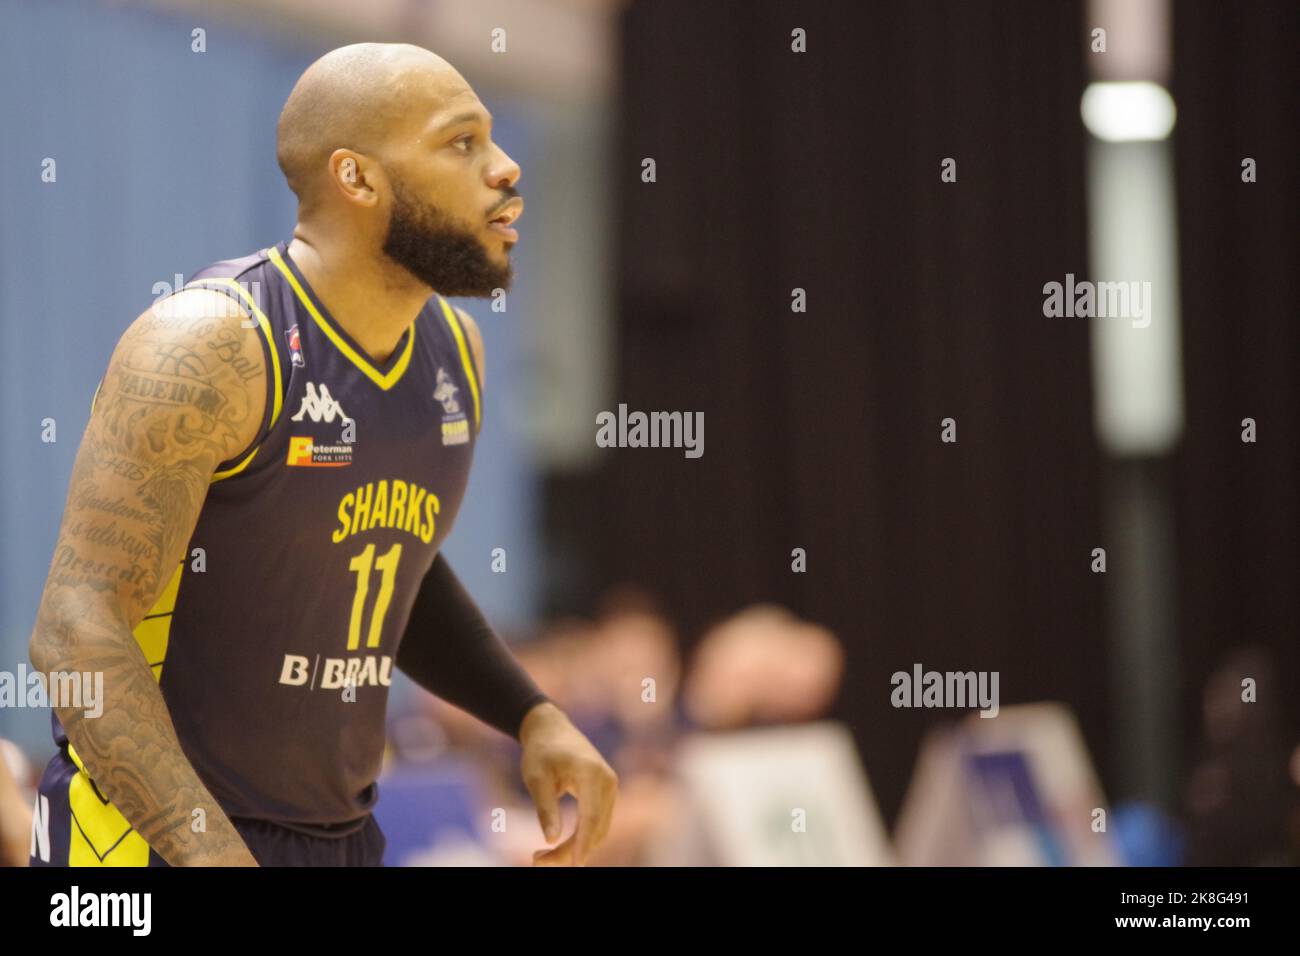 Sheffield, England, 23 October 2022. Rodney Glasgow Jr playing for B. Braun Sheffield Sharks against Newcastle Eagles in a BBL match at Ponds Forge. Credit: Colin Edwards/Alamy Live News. Stock Photo